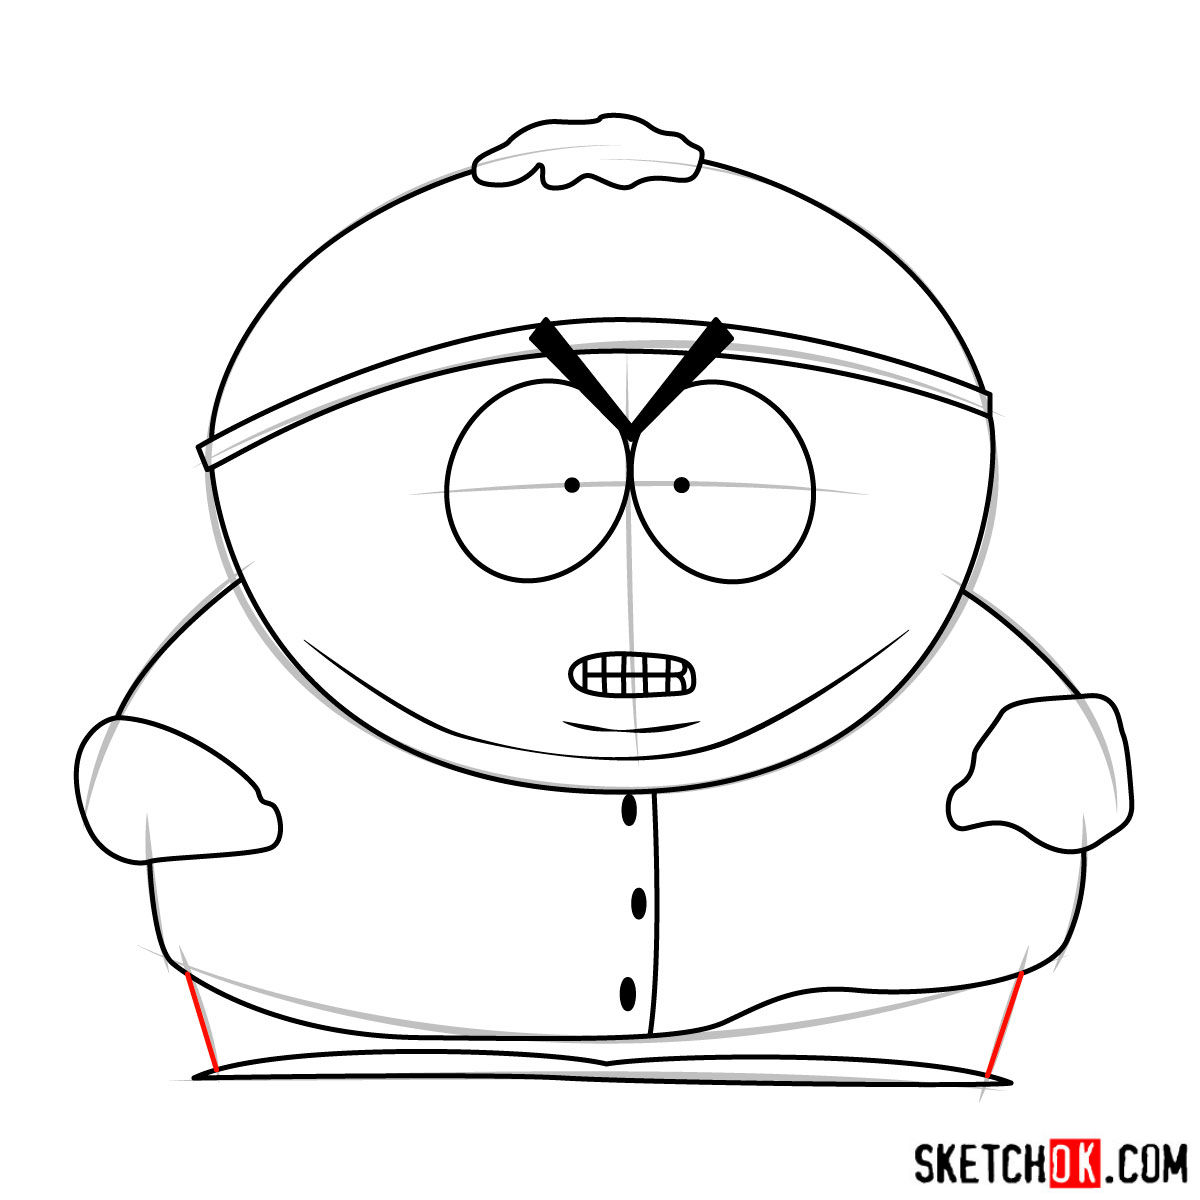 How to draw angry Eric Cartman from South Park Sketchok